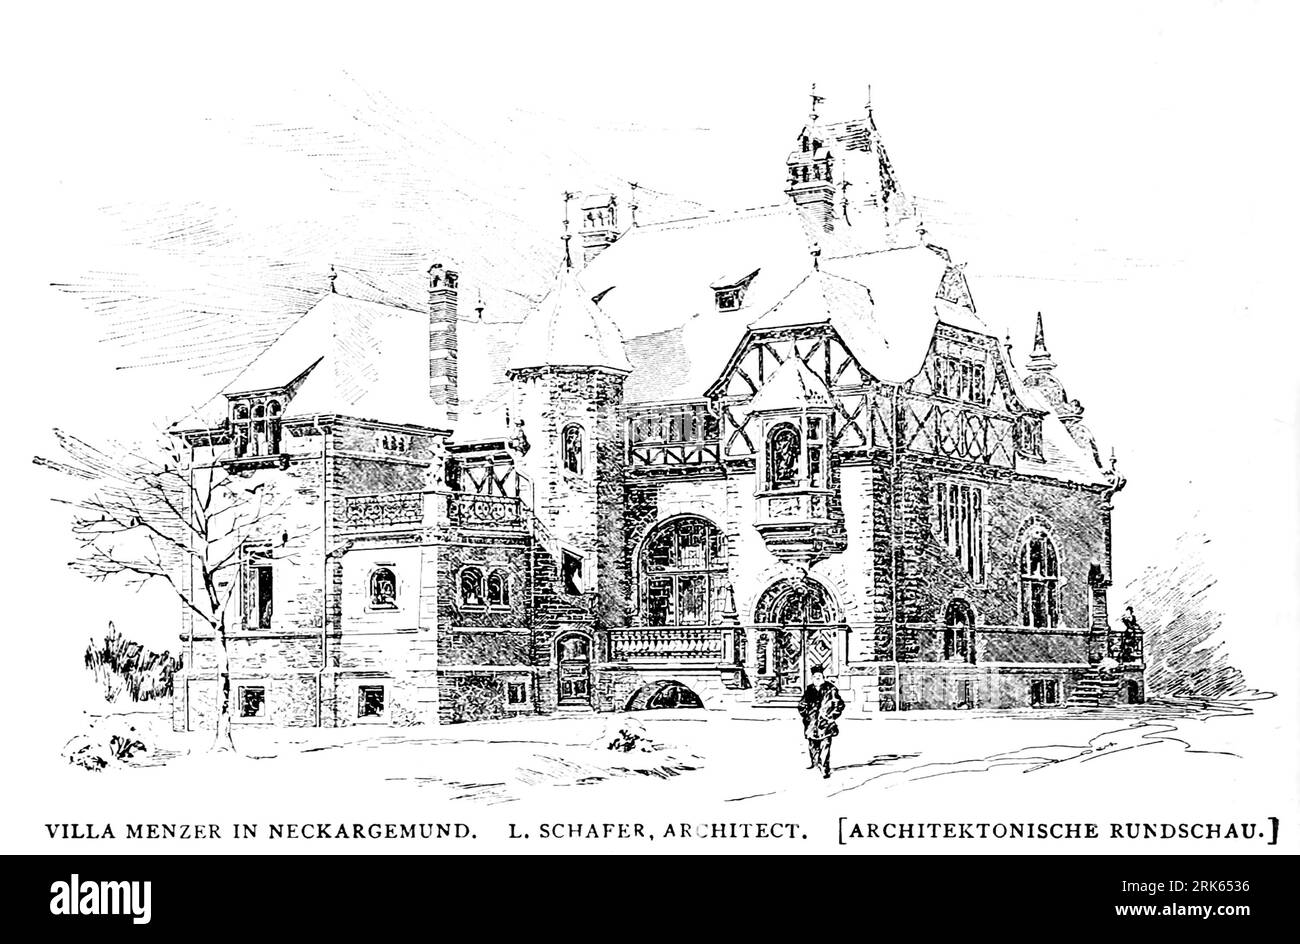 VILLA MENZER IN NECKARGEMUND, Baden-Württemberg, Germany L. SCHAFER ARCHITECT from the Article Architectural Review from The Engineering Magazine DEVOTED TO INDUSTRIAL PROGRESS Volume XI October 1896 NEW YORK The Engineering Magazine Co Stock Photo